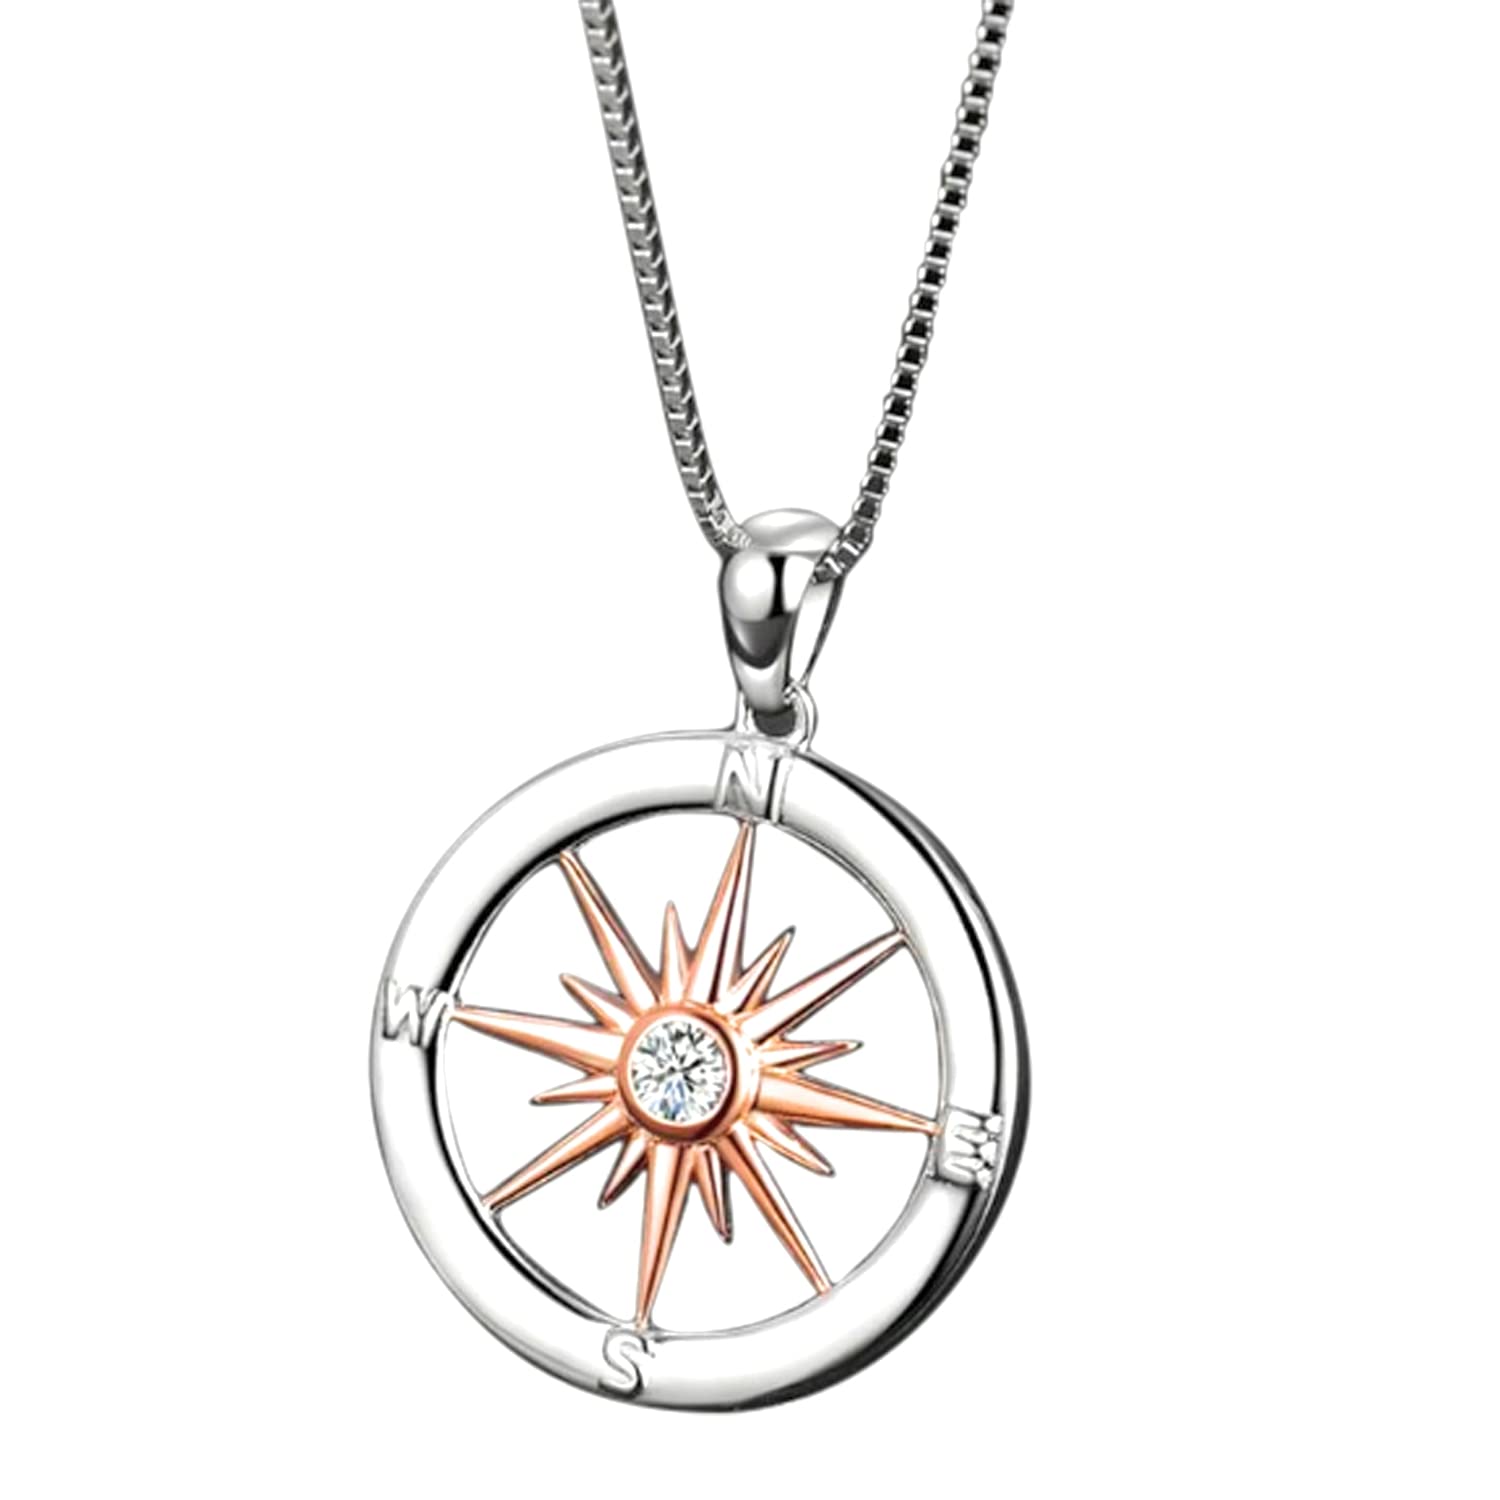 Sterling Silver Compass Design Necklace With Rose Gold Plated Sun Set With Cubic Zirconia Stone. Includes 45cm 925 Silver Box Chain and Jewellery Gift Box.